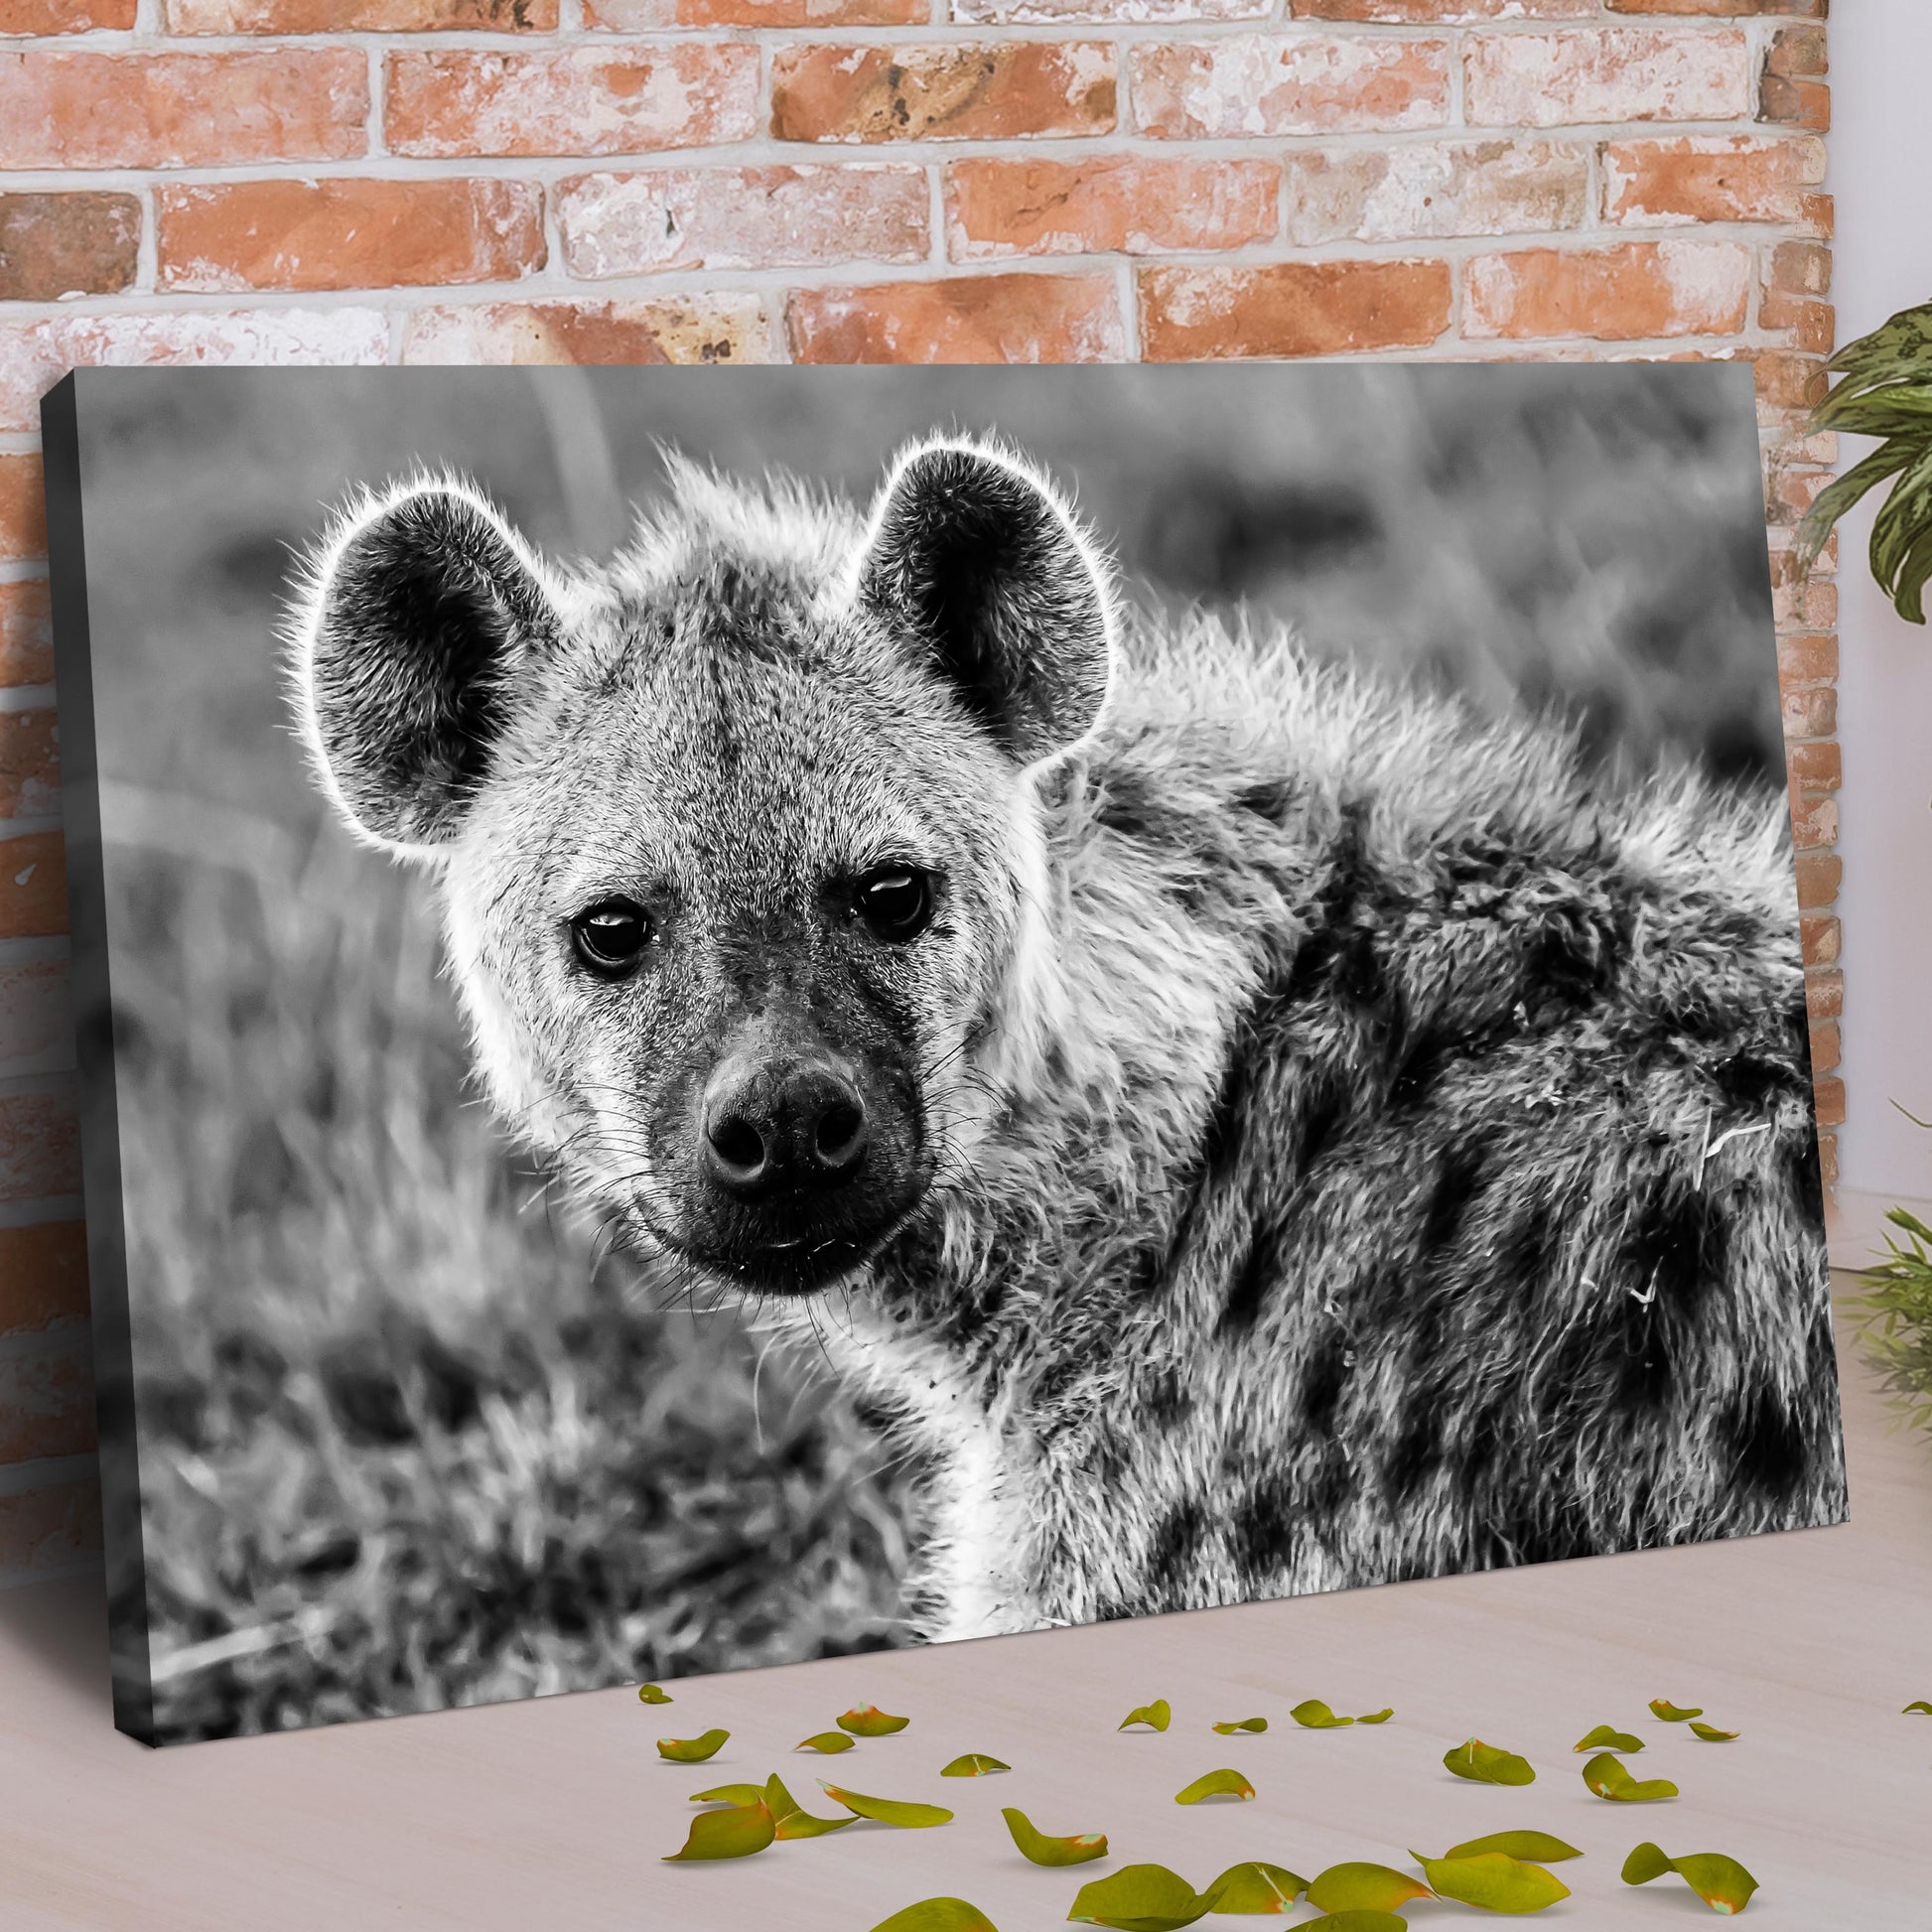 Hyena in Black and White Canvas Wall Art Style 2 - Image by Tailored Canvases